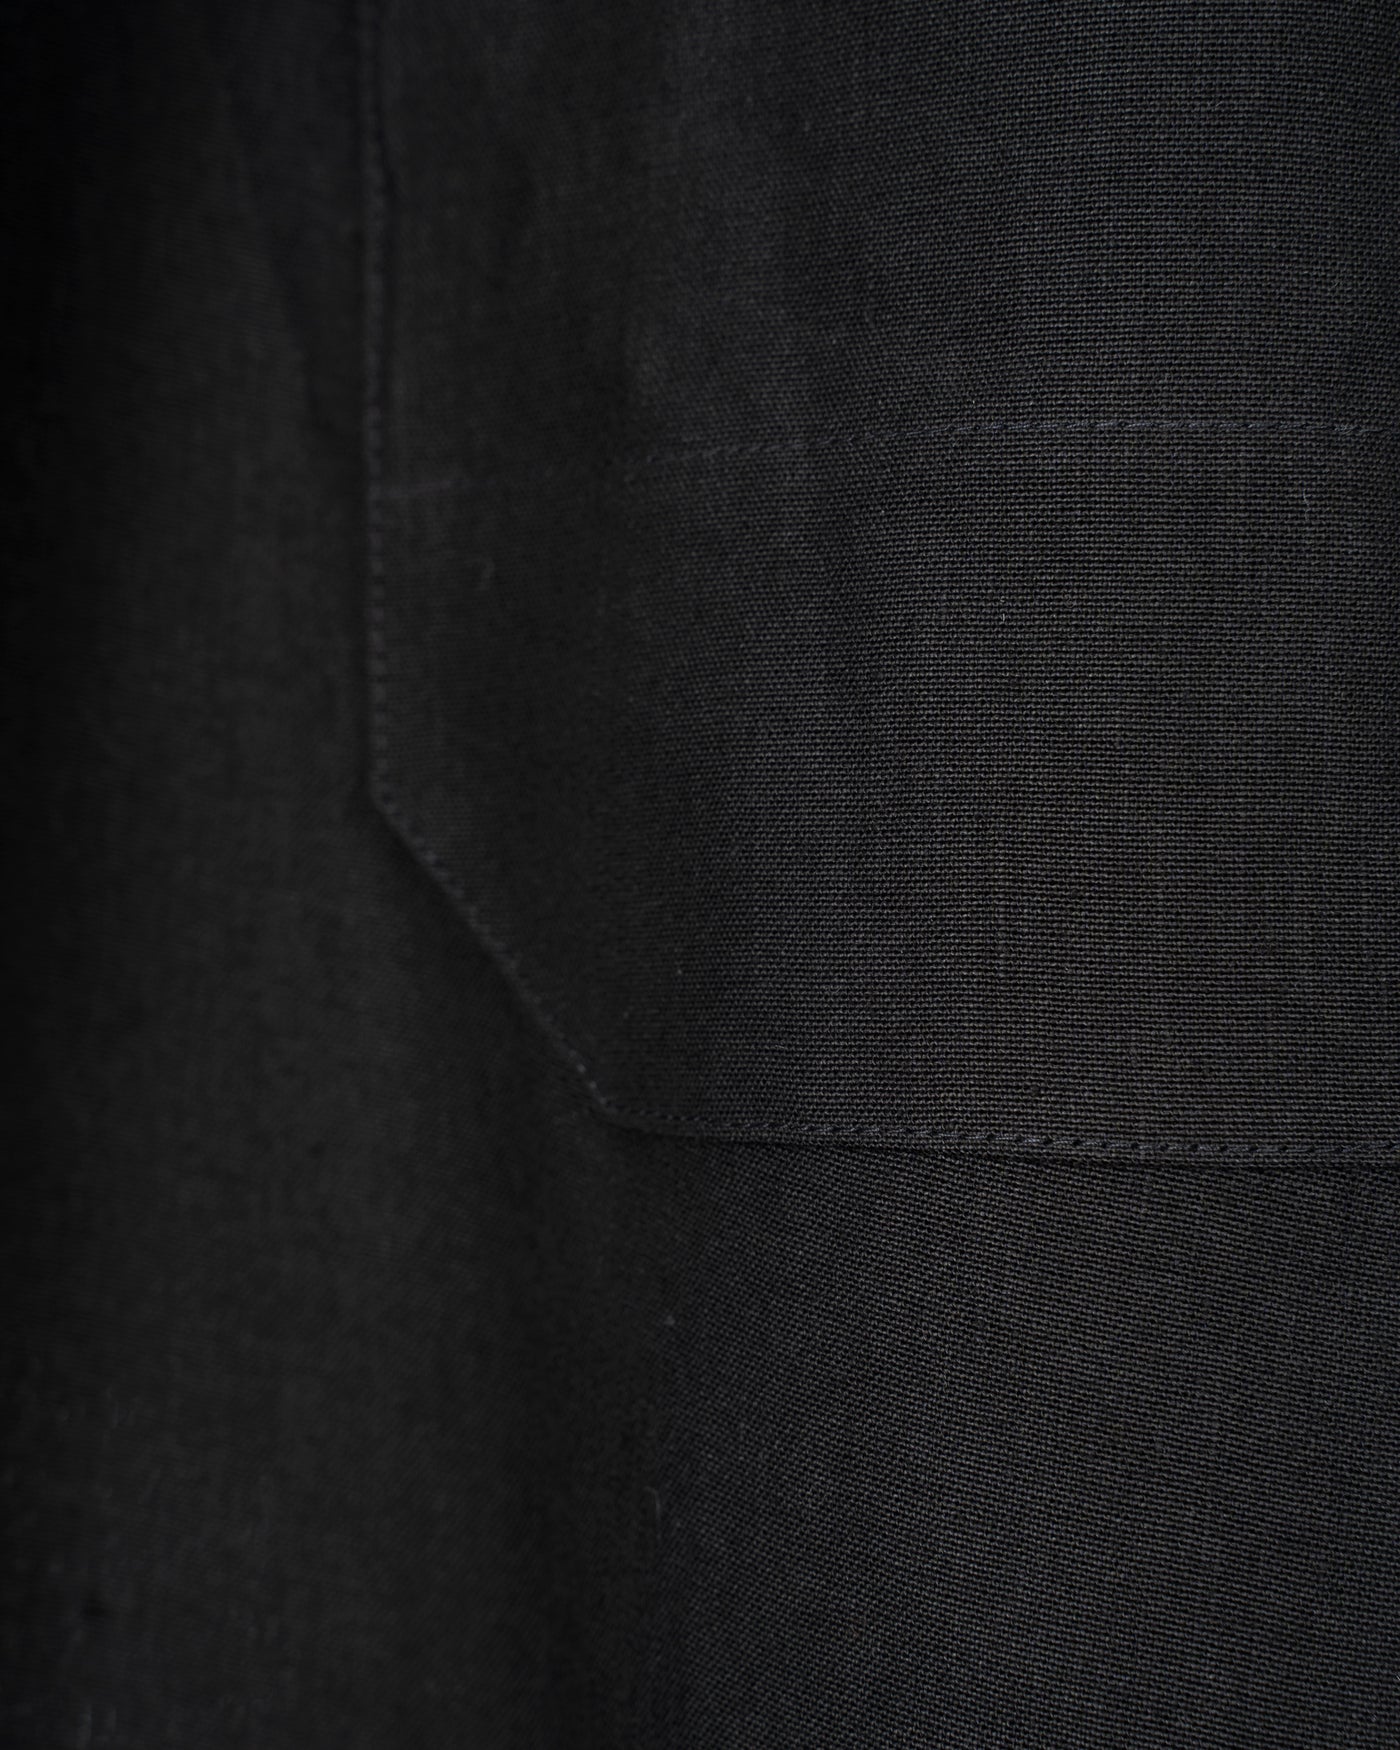 TROUSERS #77 -  BLACK PAPER CLOTH